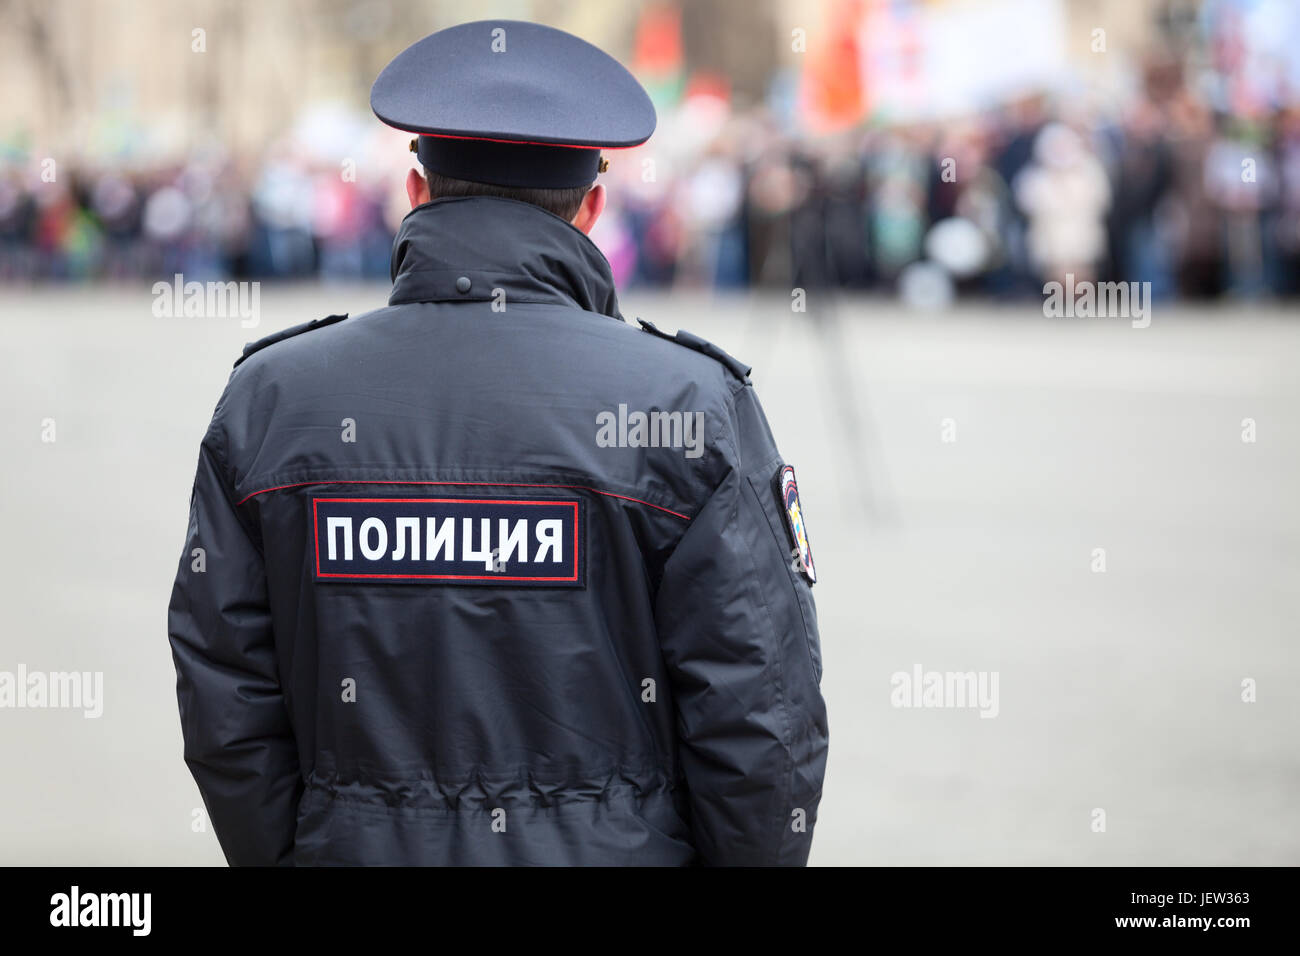 Russian policeman officer stands to opposite crowd with inscription Police  on the uniform jacket, Russia, copy space Stock Photo - Alamy